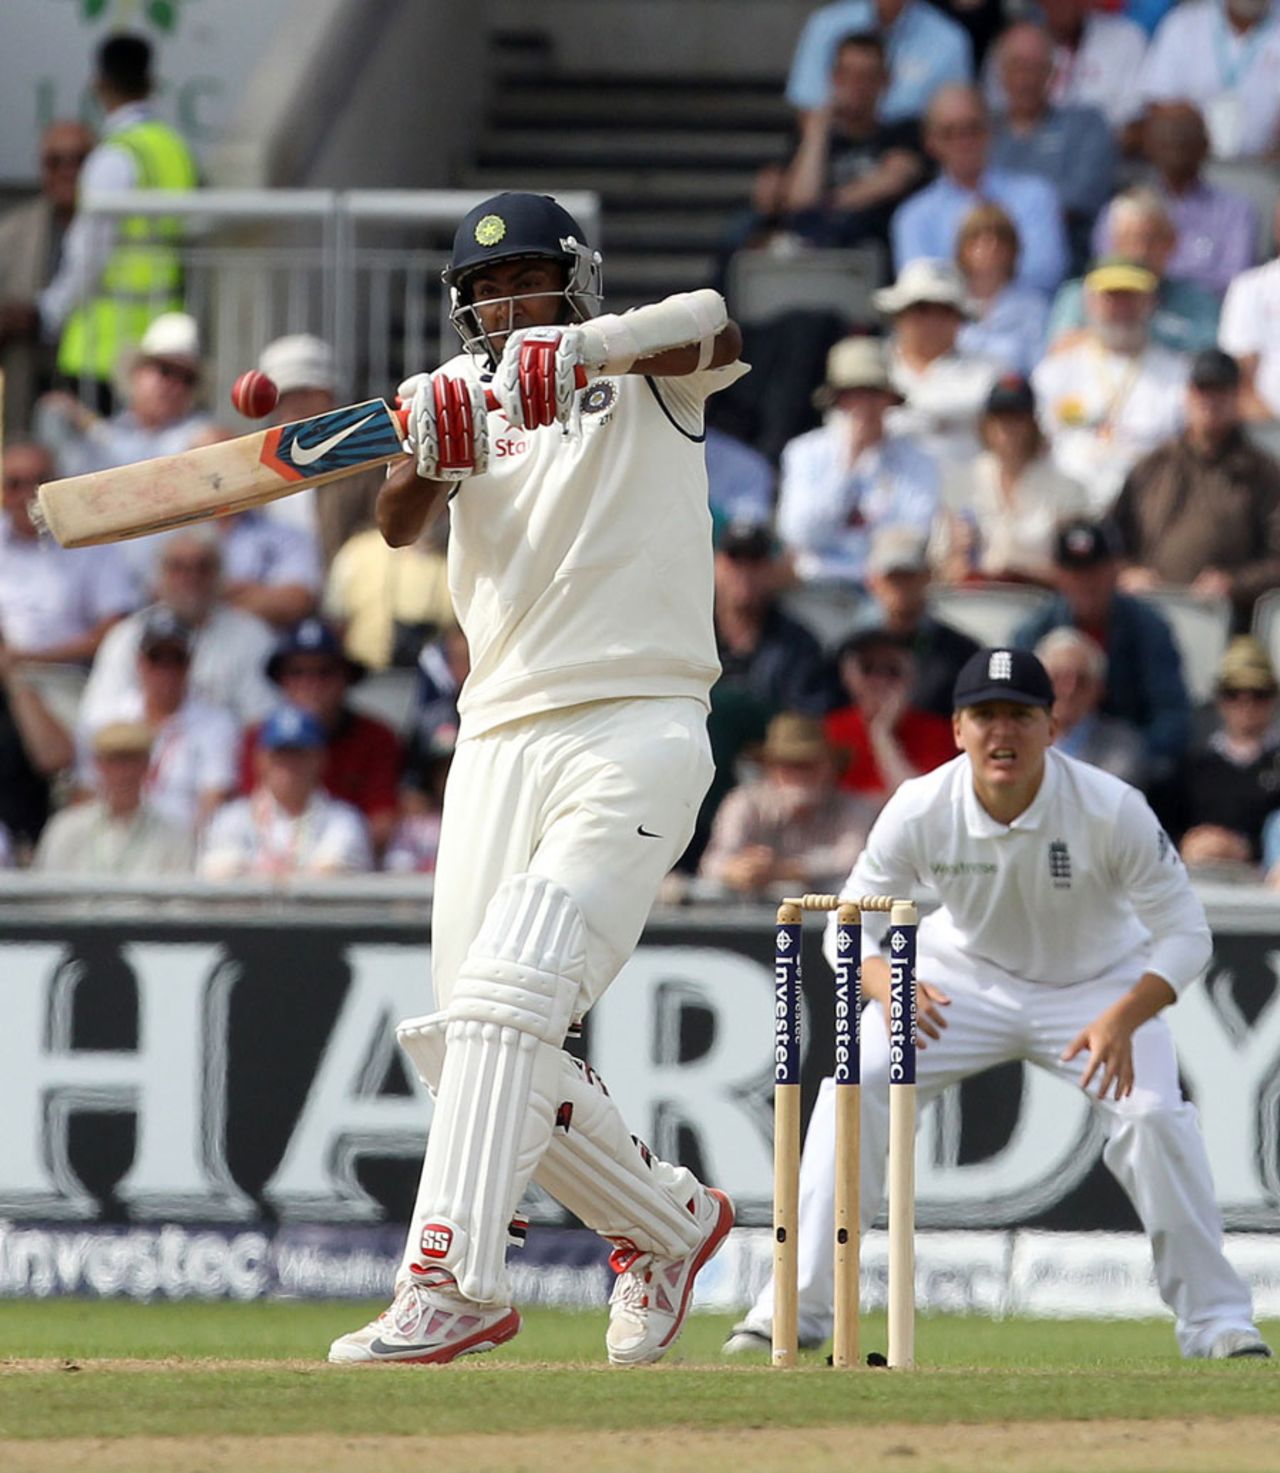 R Ashwin fell playing the pull shot, England v India, 4th Test, Old Trafford, 1st day, August 7, 2014